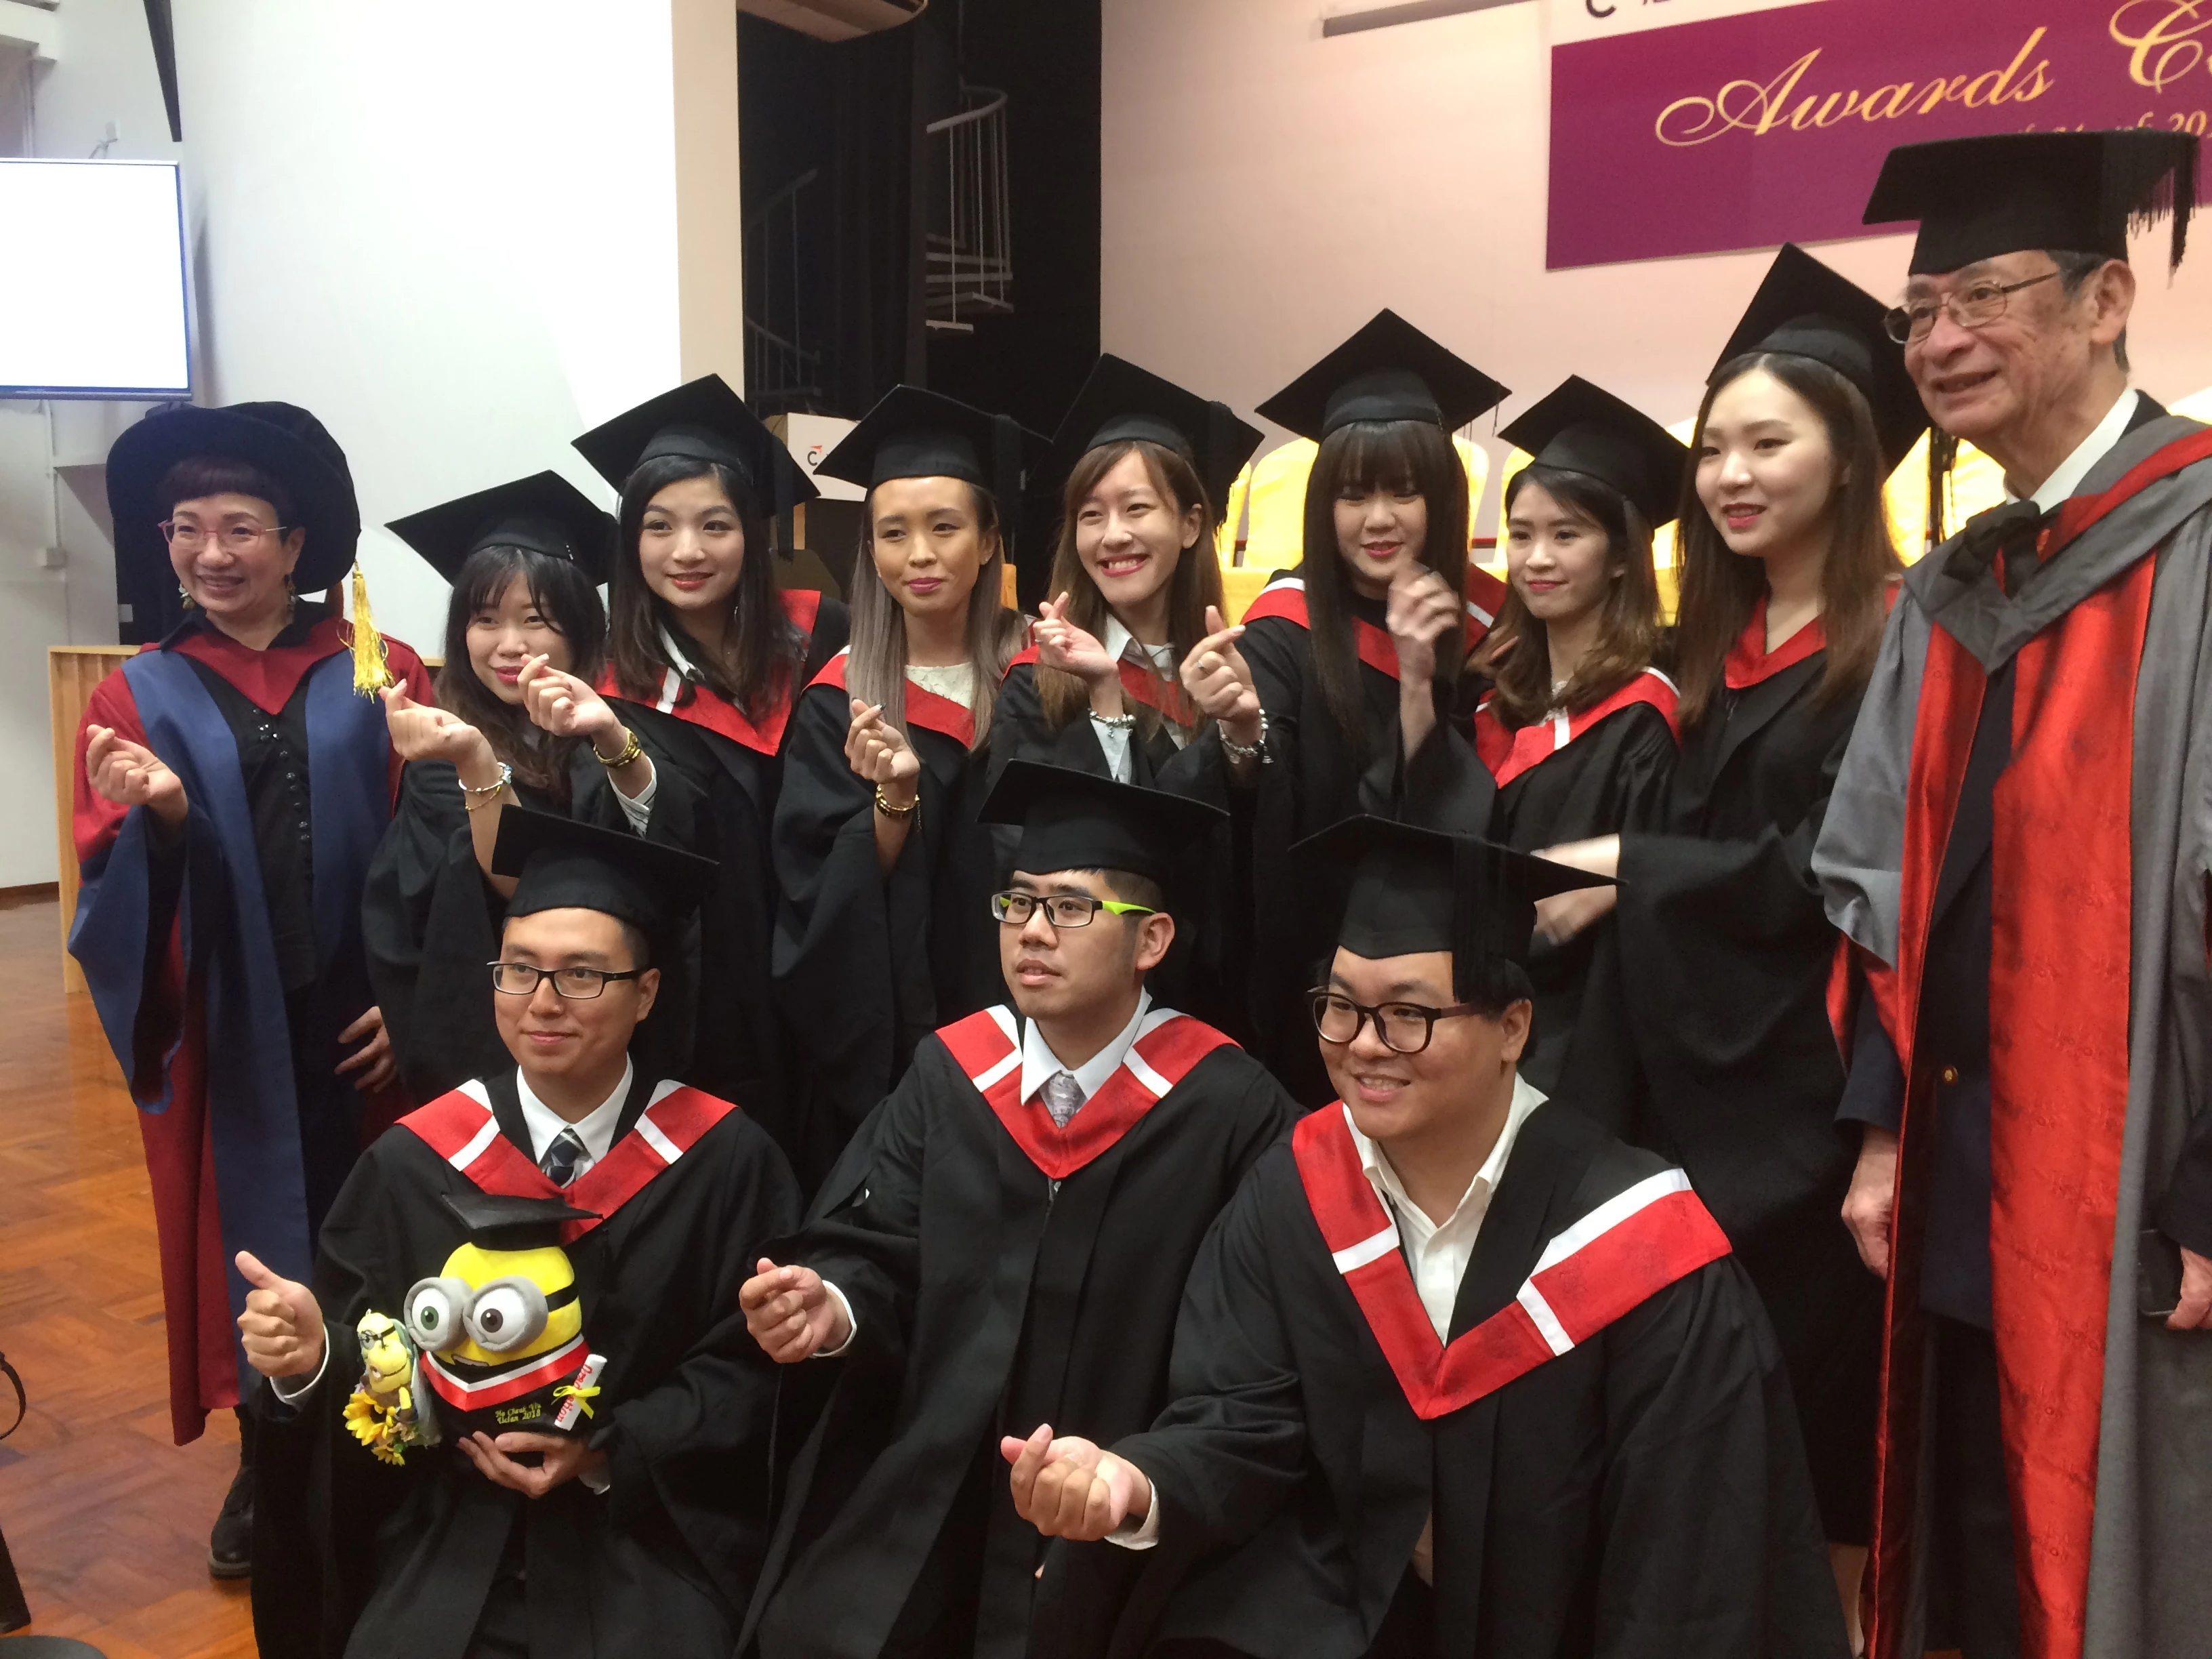 Hong Kong College of Technology 2018 graduates with Richard Willis, Honorary Fellow